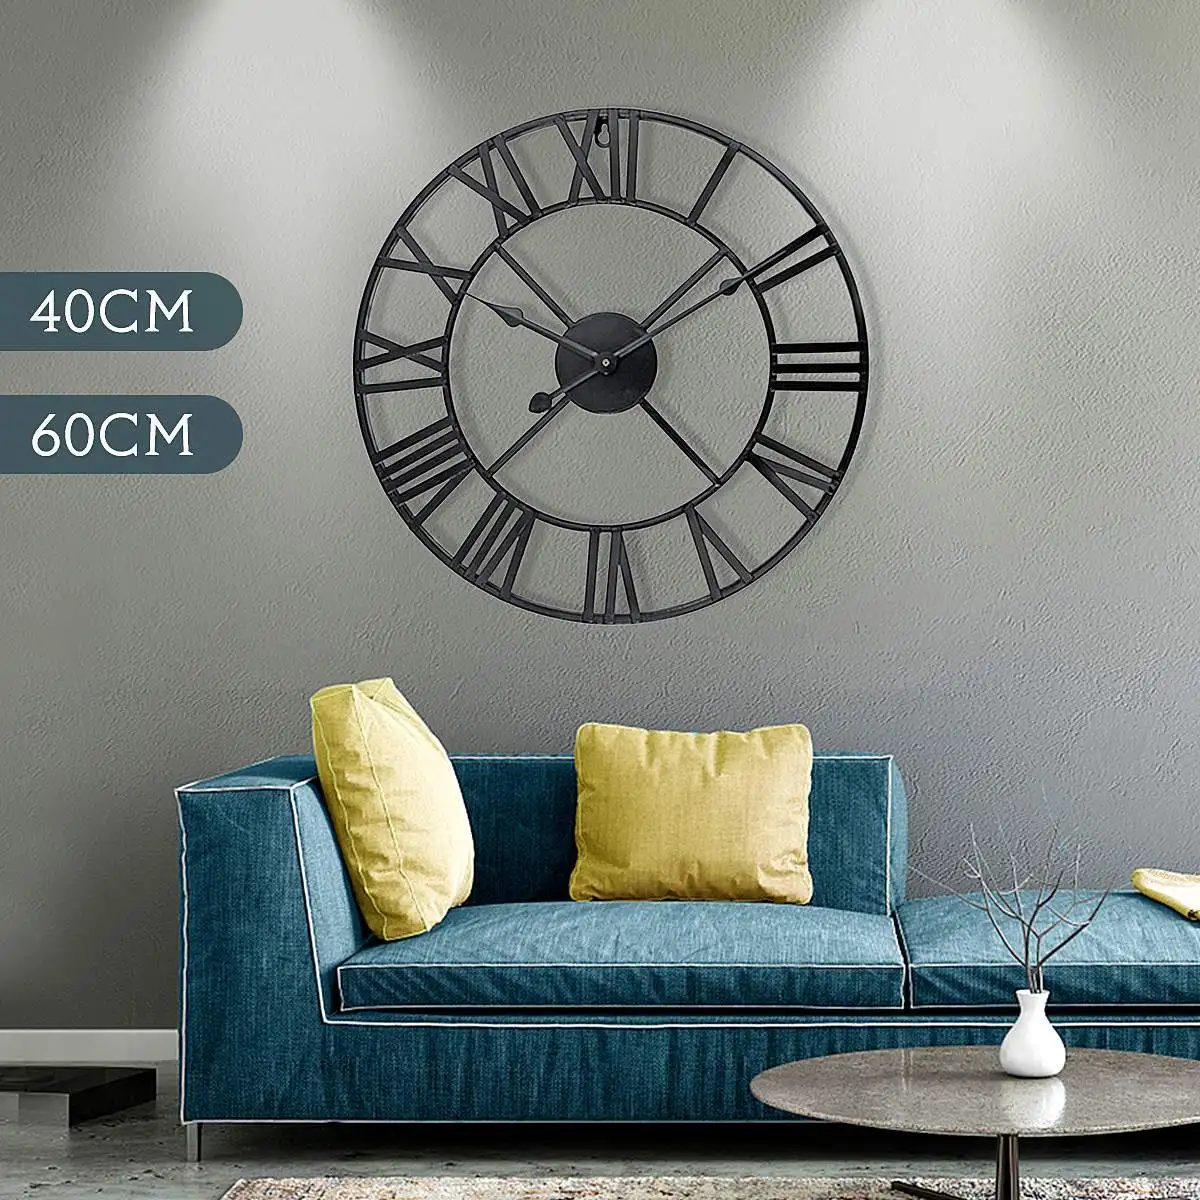 Petyoung 60cm Round Numbers Large Clock Metal Wall Clock Round Numbers Large Clock Vintage Industrial Design Decoration